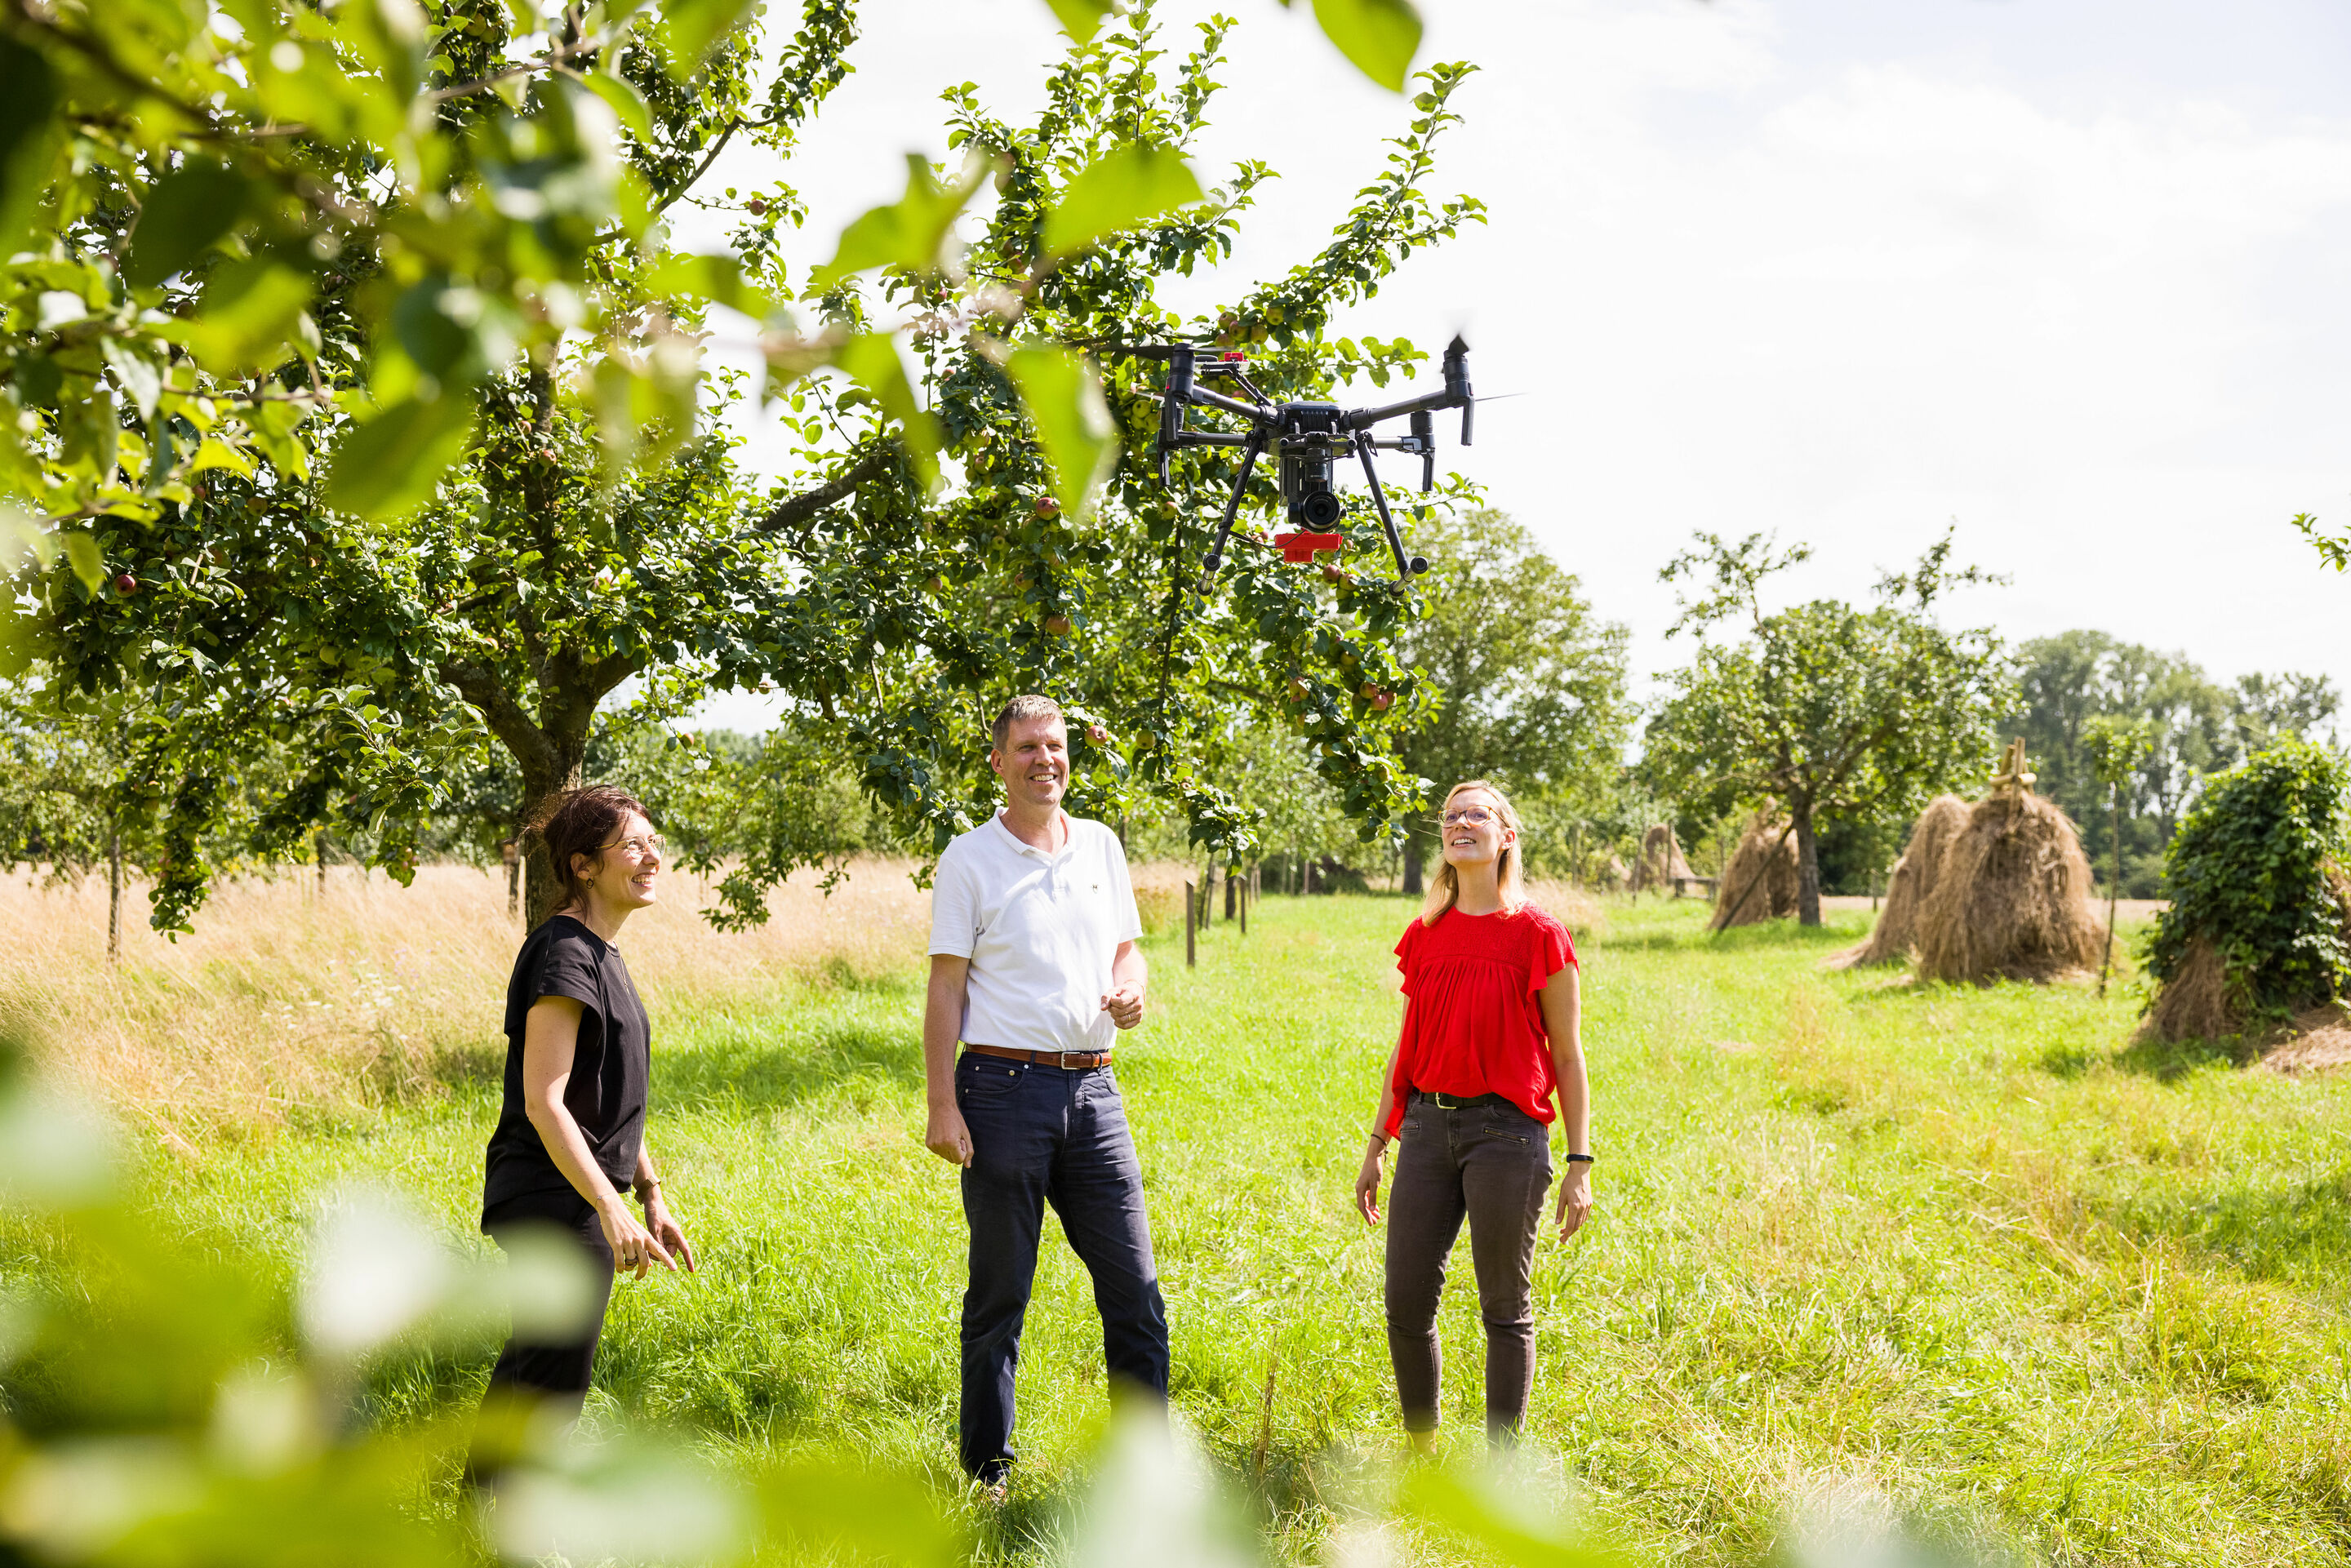 Drones for environmental protection: Successful monitoring of fruit tree orchard stocks